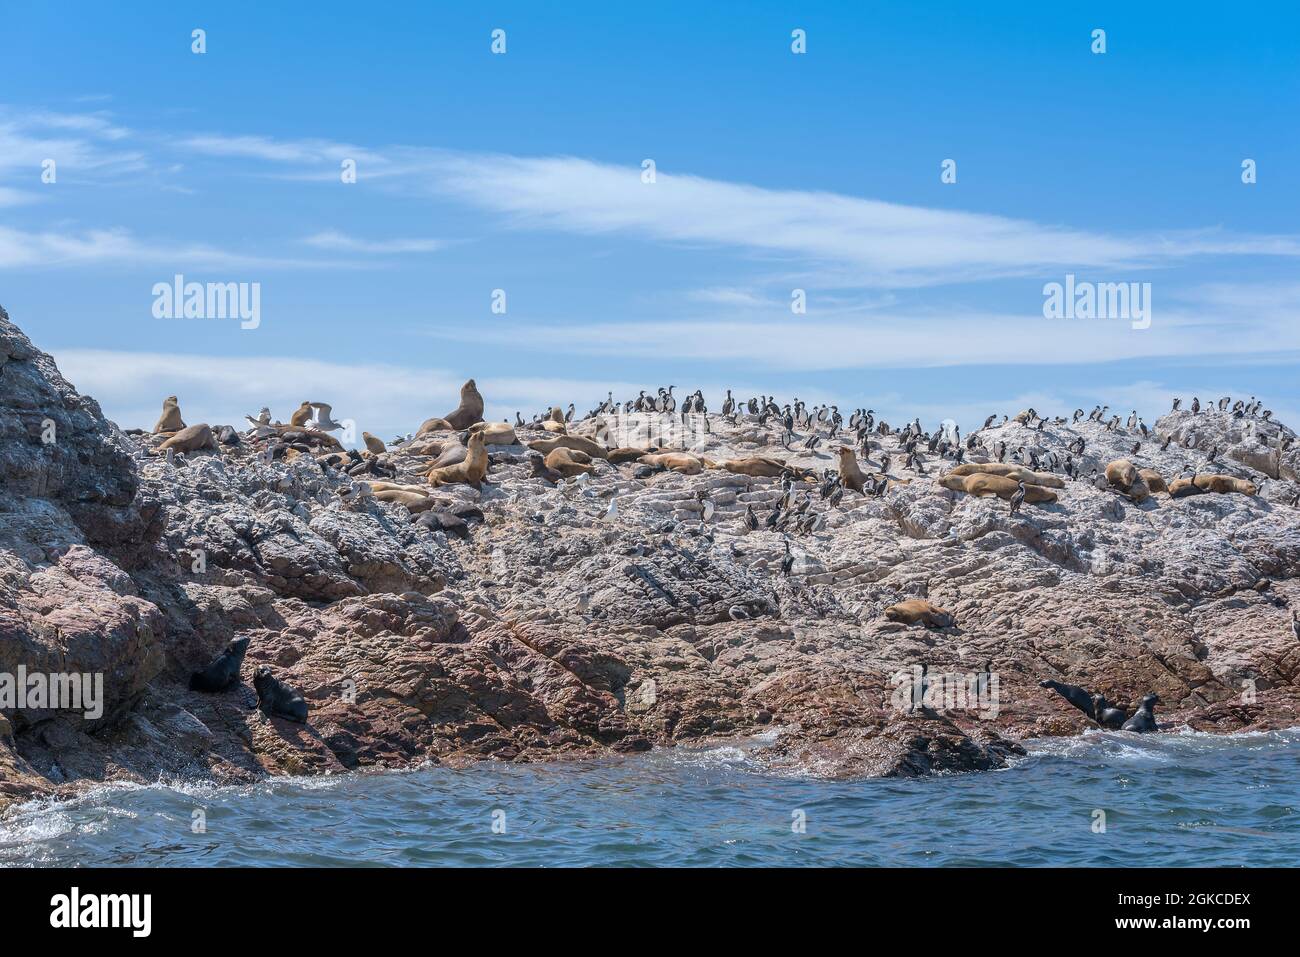 Sea lions and cormorant colony on the Argentine coast of Patagonia Stock Photo